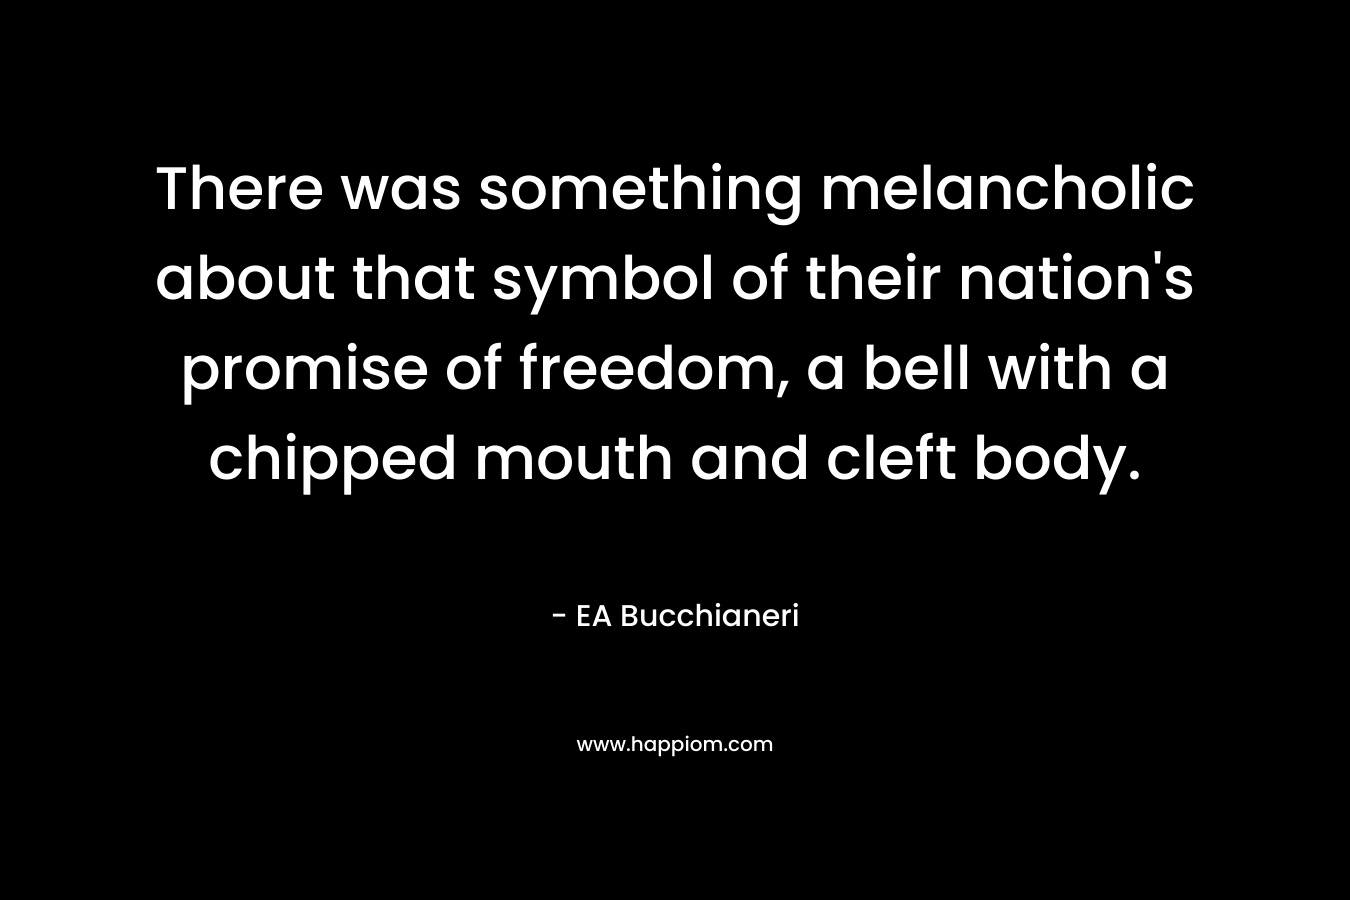 There was something melancholic about that symbol of their nation’s promise of freedom, a bell with a chipped mouth and cleft body. – EA Bucchianeri